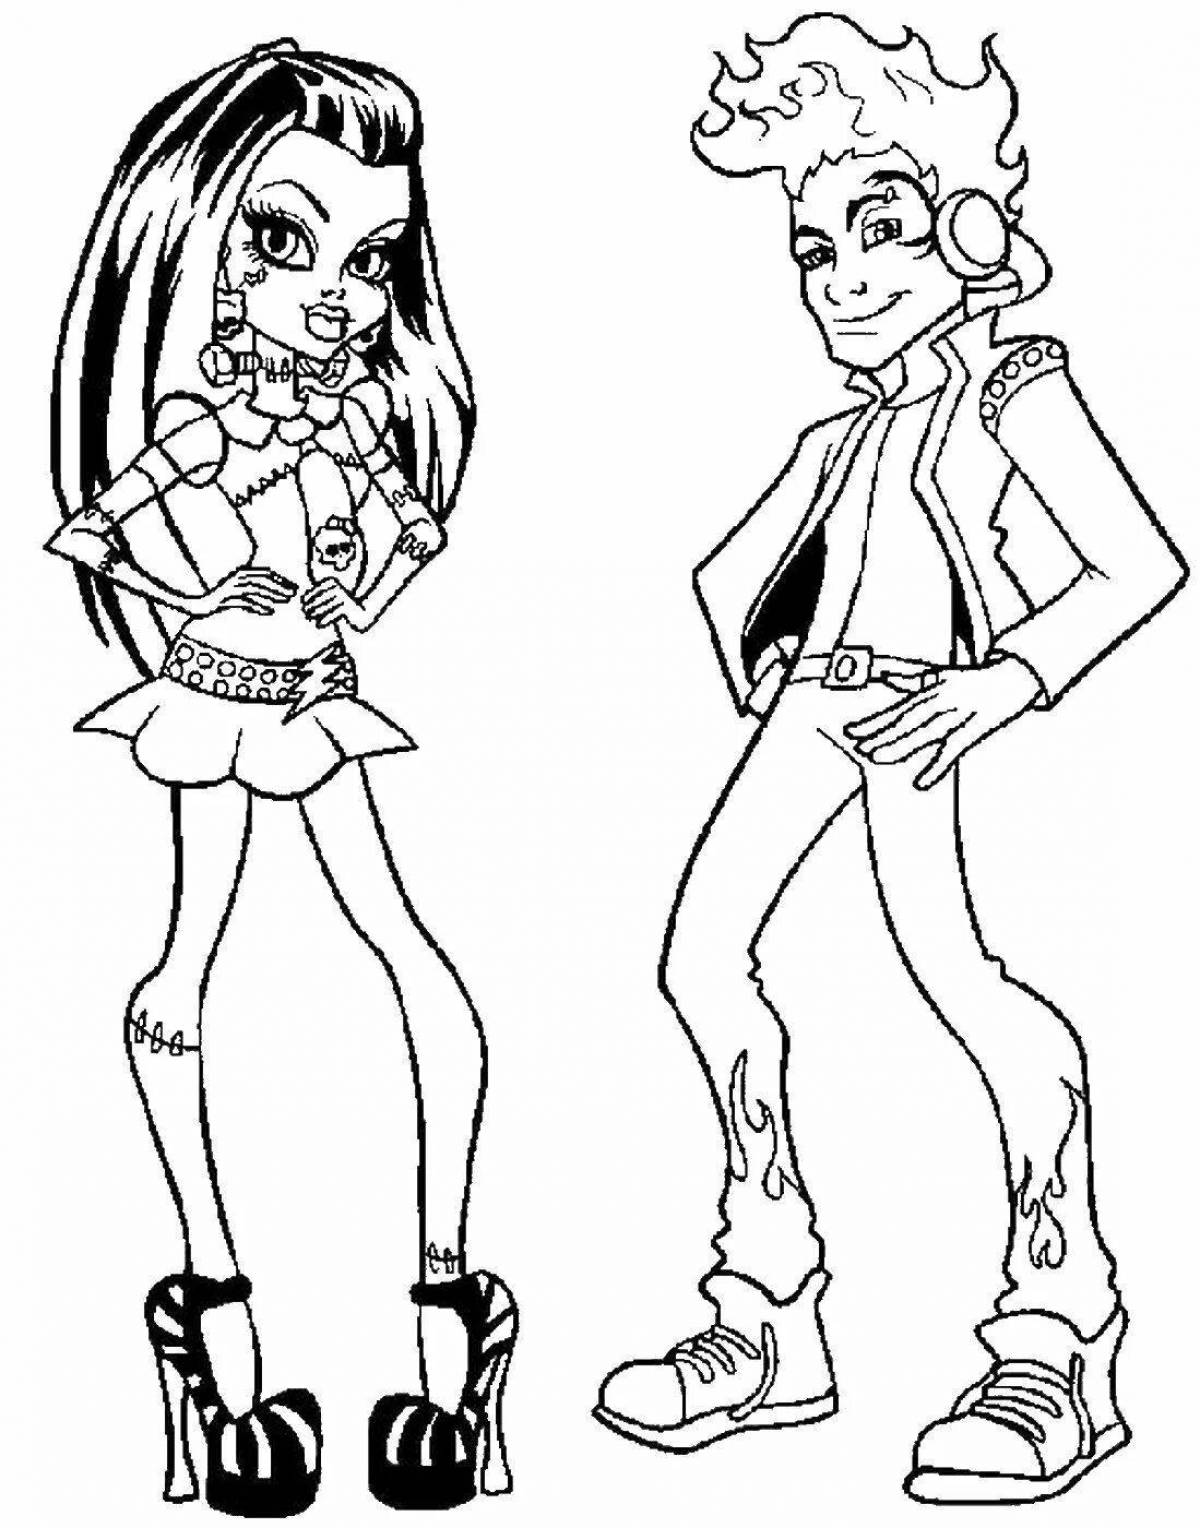 Charming monster high games coloring book